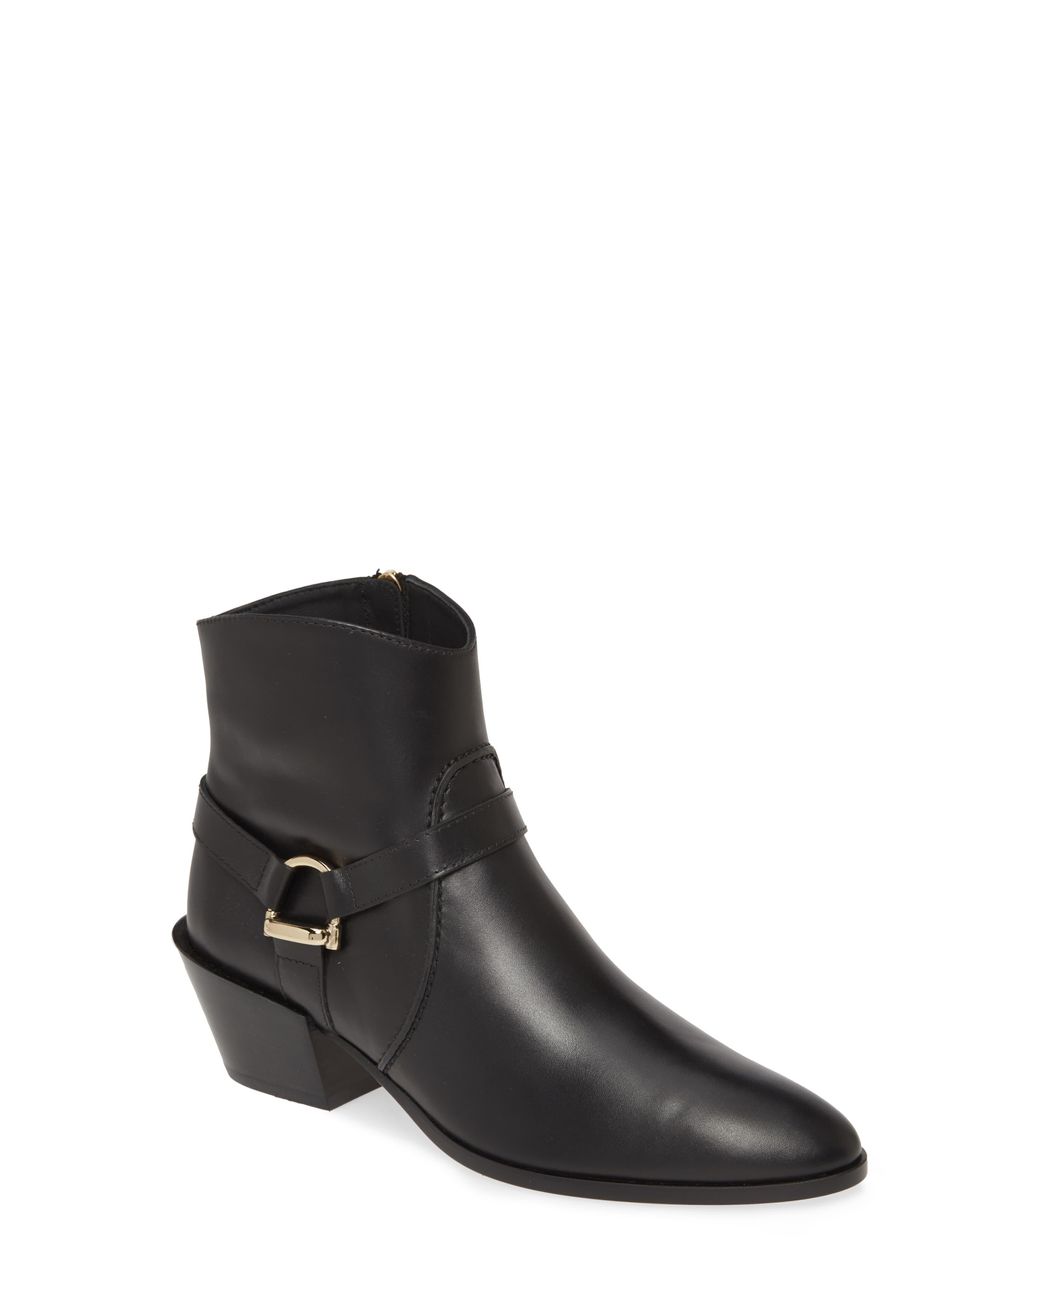 Tod's Leather Tex Bootie in Black - Lyst